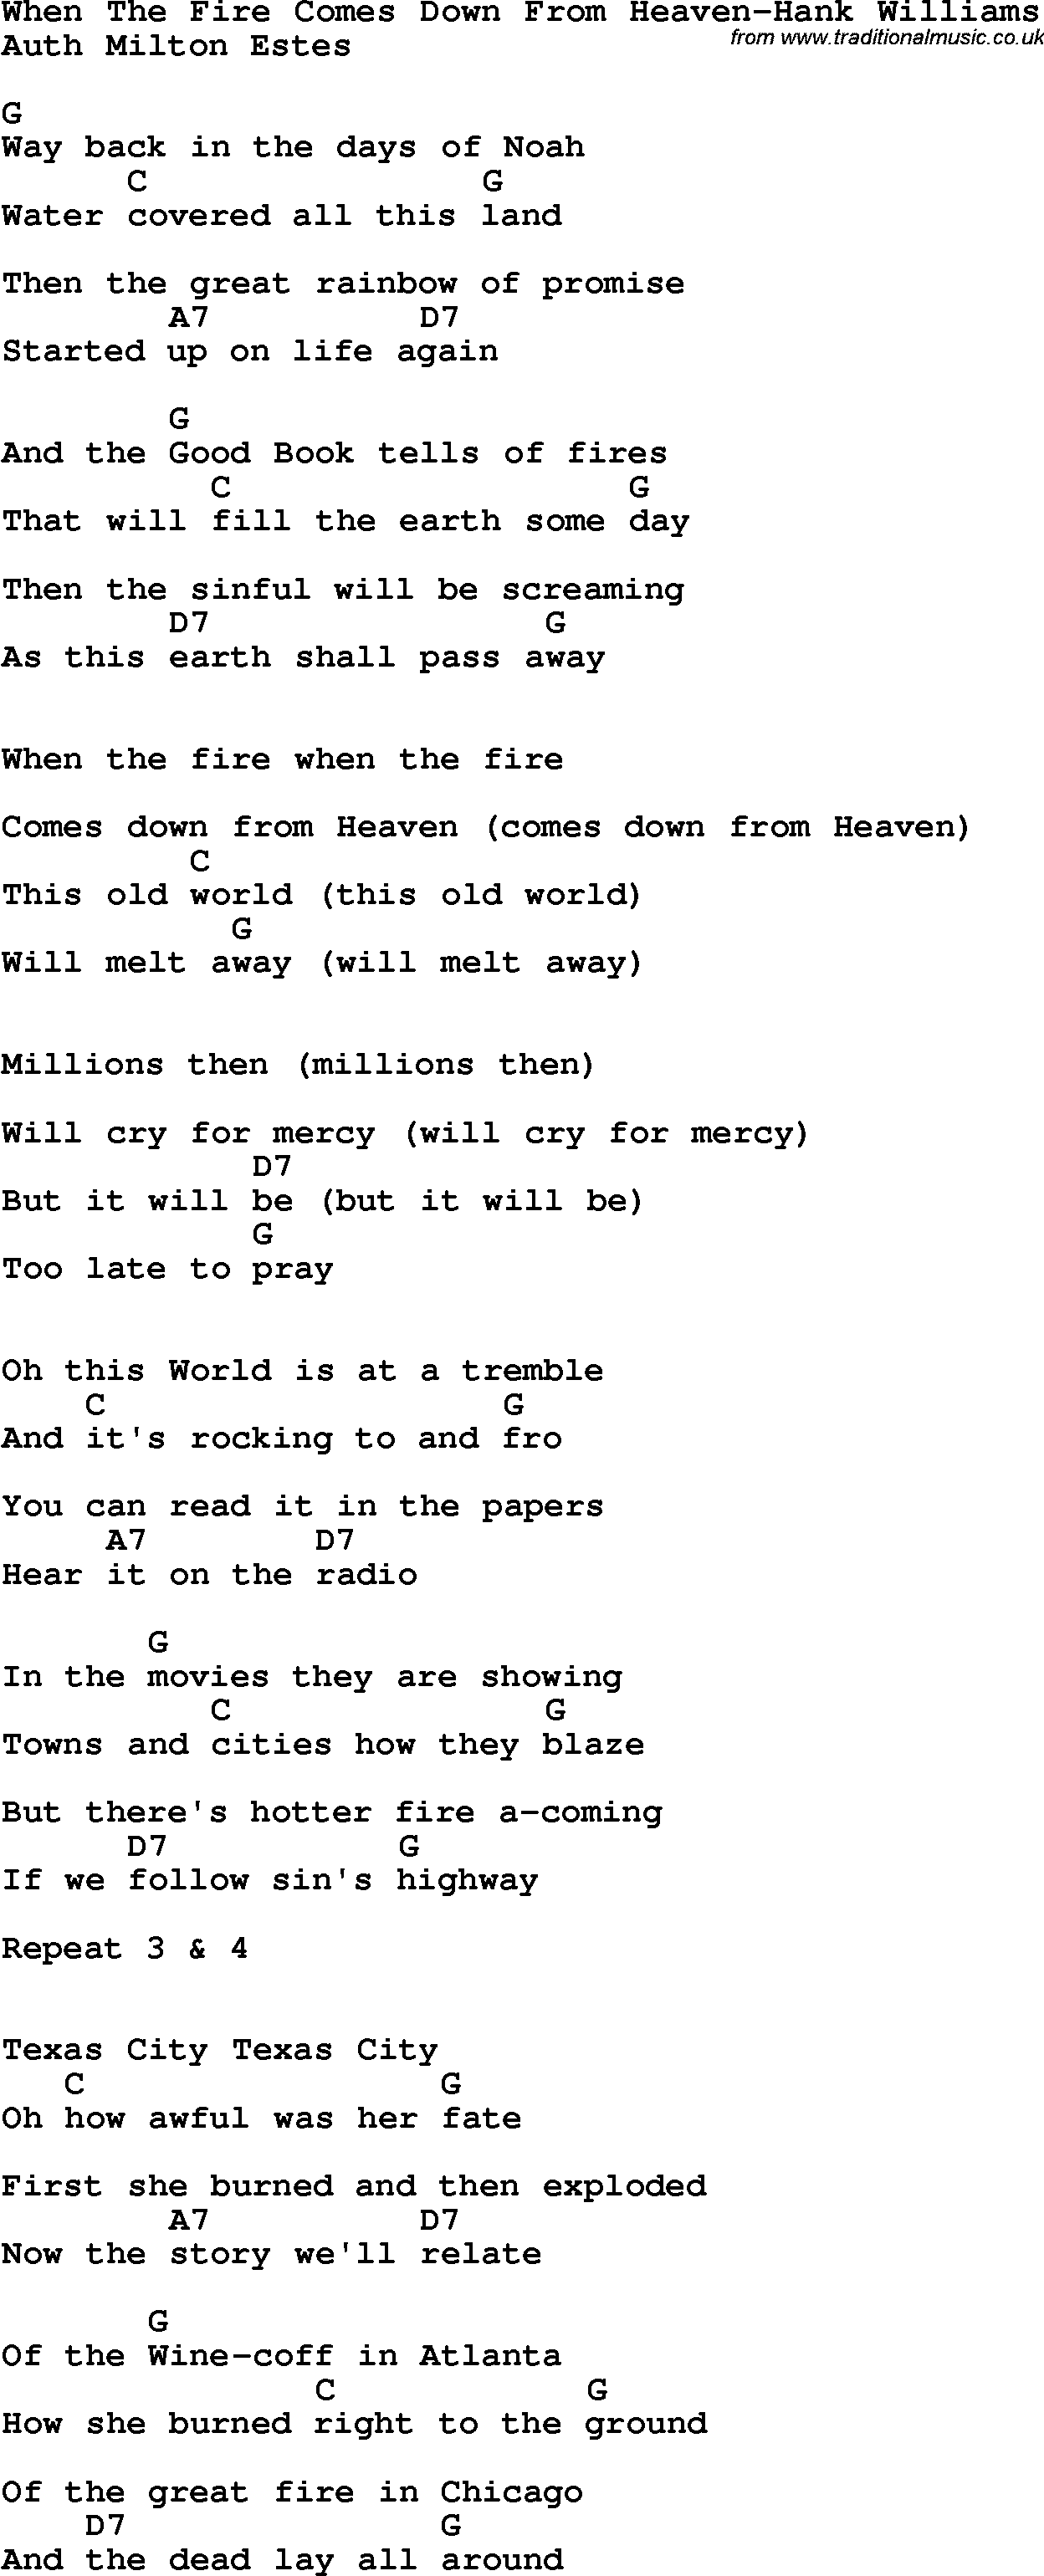 Country, Southern and Bluegrass Gospel Song When The Fire Comes Down From Heaven-Hank Williams lyrics and chords